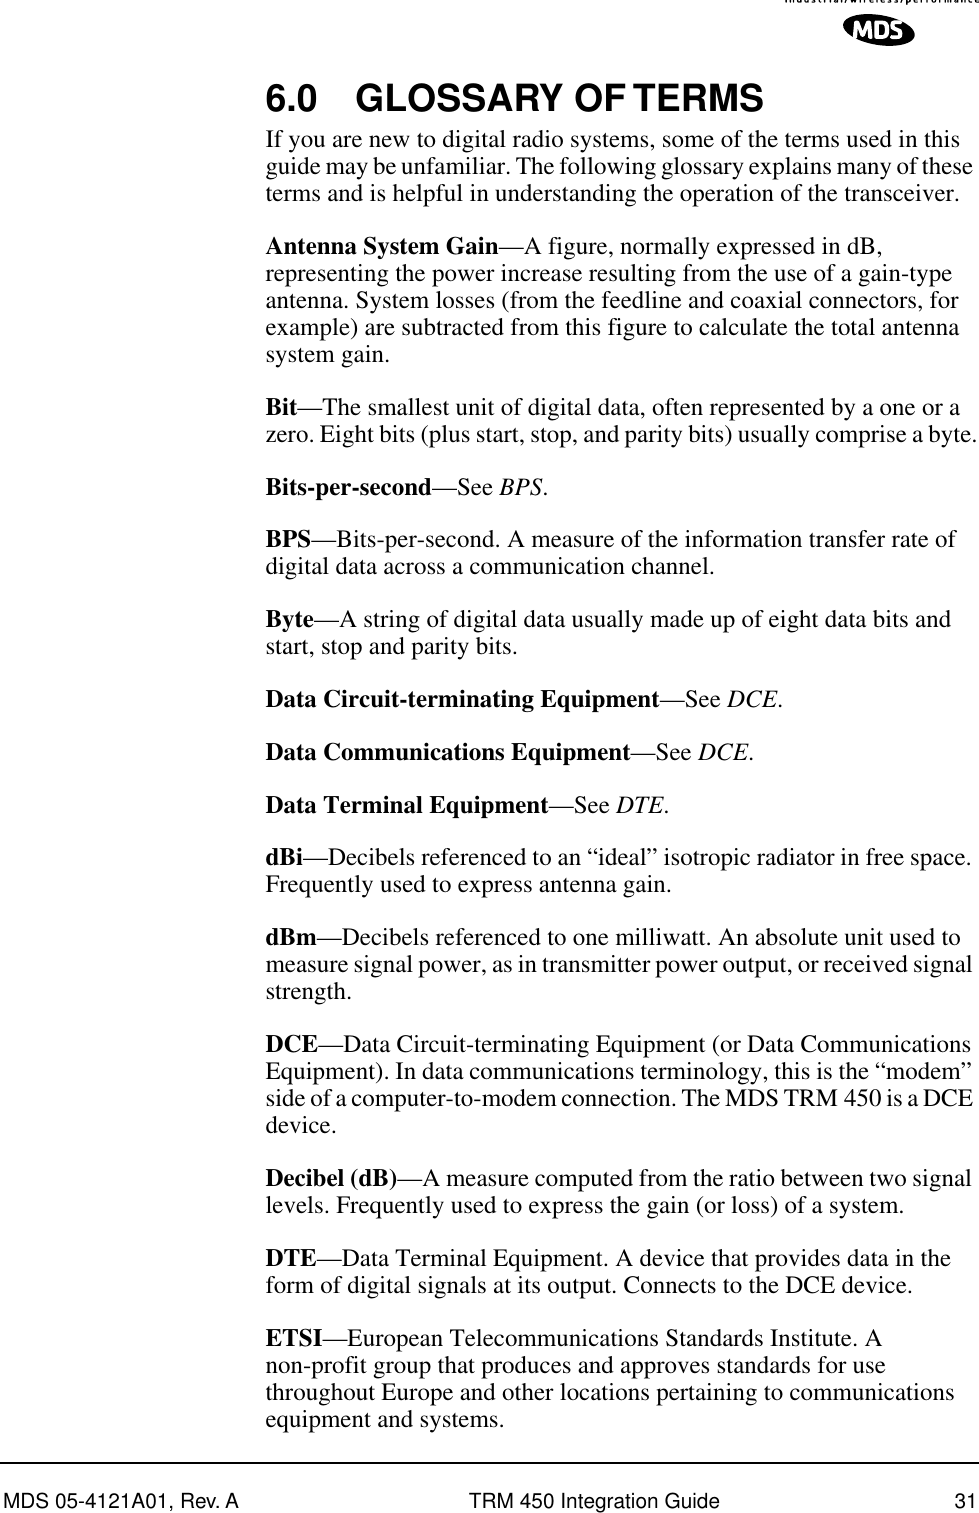 MDS 05-4121A01, Rev. A TRM 450 Integration Guide 316.0 GLOSSARY OF TERMSIf you are new to digital radio systems, some of the terms used in this guide may be unfamiliar. The following glossary explains many of these terms and is helpful in understanding the operation of the transceiver.Antenna System Gain—A figure, normally expressed in dB, representing the power increase resulting from the use of a gain-type antenna. System losses (from the feedline and coaxial connectors, for example) are subtracted from this figure to calculate the total antenna system gain.Bit—The smallest unit of digital data, often represented by a one or a zero. Eight bits (plus start, stop, and parity bits) usually comprise a byte.Bits-per-second—See BPS.BPS—Bits-per-second. A measure of the information transfer rate of digital data across a communication channel.Byte—A string of digital data usually made up of eight data bits and start, stop and parity bits.Data Circuit-terminating Equipment—See DCE.Data Communications Equipment—See DCE.Data Terminal Equipment—See DTE.dBi—Decibels referenced to an “ideal” isotropic radiator in free space. Frequently used to express antenna gain.dBm—Decibels referenced to one milliwatt. An absolute unit used to measure signal power, as in transmitter power output, or received signal strength.DCE—Data Circuit-terminating Equipment (or Data Communications Equipment). In data communications terminology, this is the “modem” side of a computer-to-modem connection. The MDS TRM 450 is a DCE device.Decibel (dB)—A measure computed from the ratio between two signal levels. Frequently used to express the gain (or loss) of a system.DTE—Data Terminal Equipment. A device that provides data in the form of digital signals at its output. Connects to the DCE device.ETSI—European Telecommunications Standards Institute. A non-profit group that produces and approves standards for use throughout Europe and other locations pertaining to communications equipment and systems.